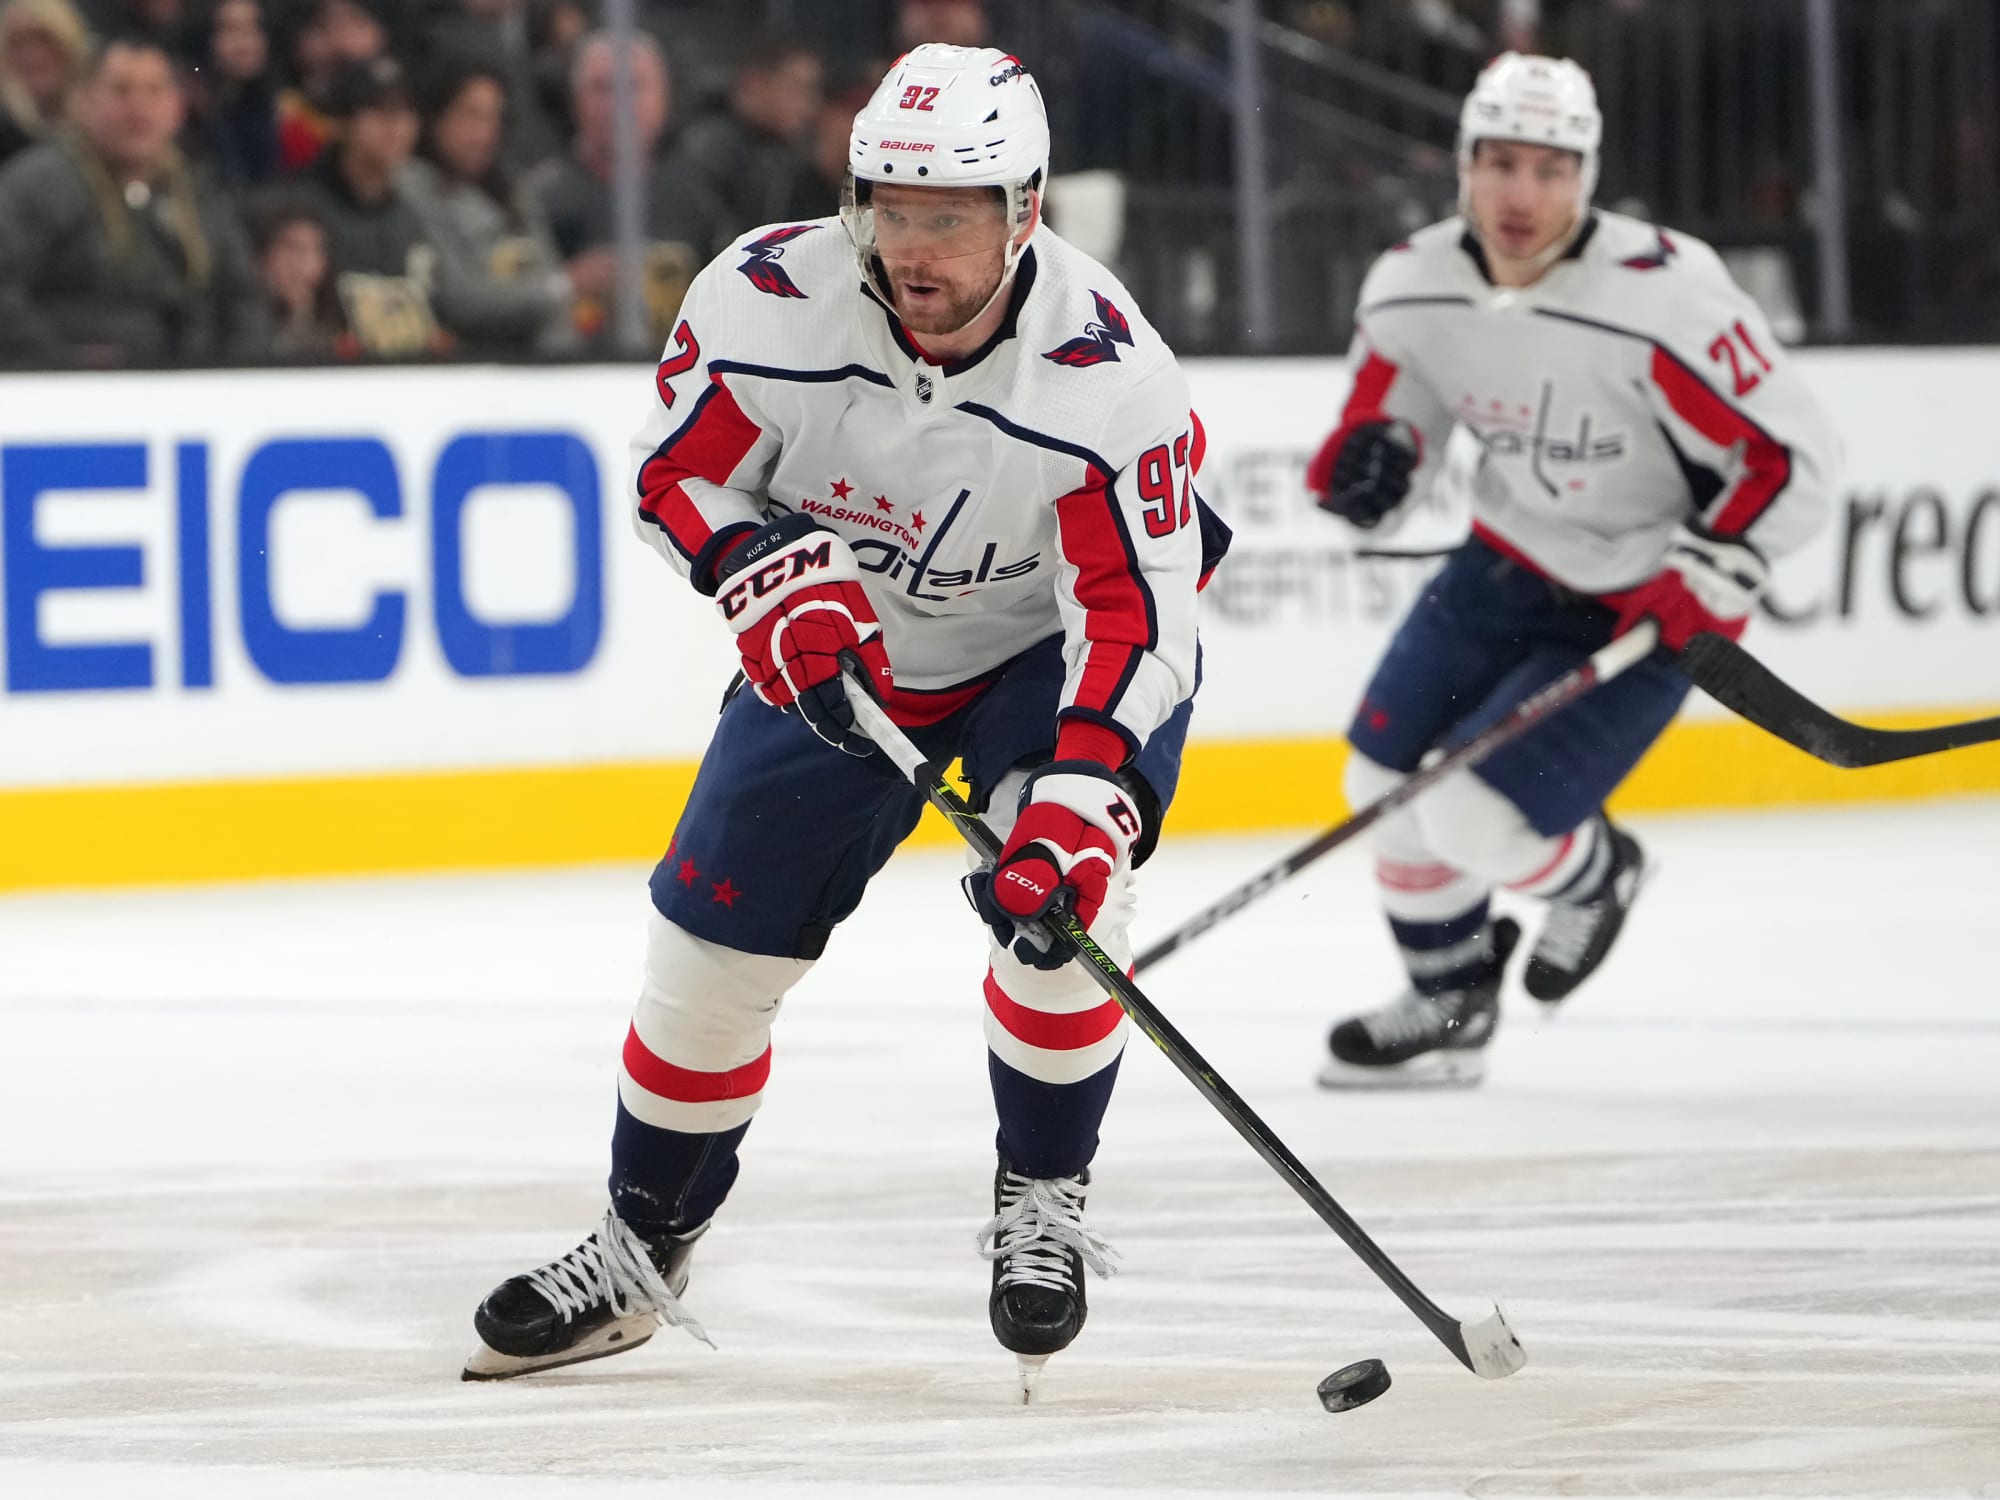 Top 3 keys to victory for the Capitals against Avalanche